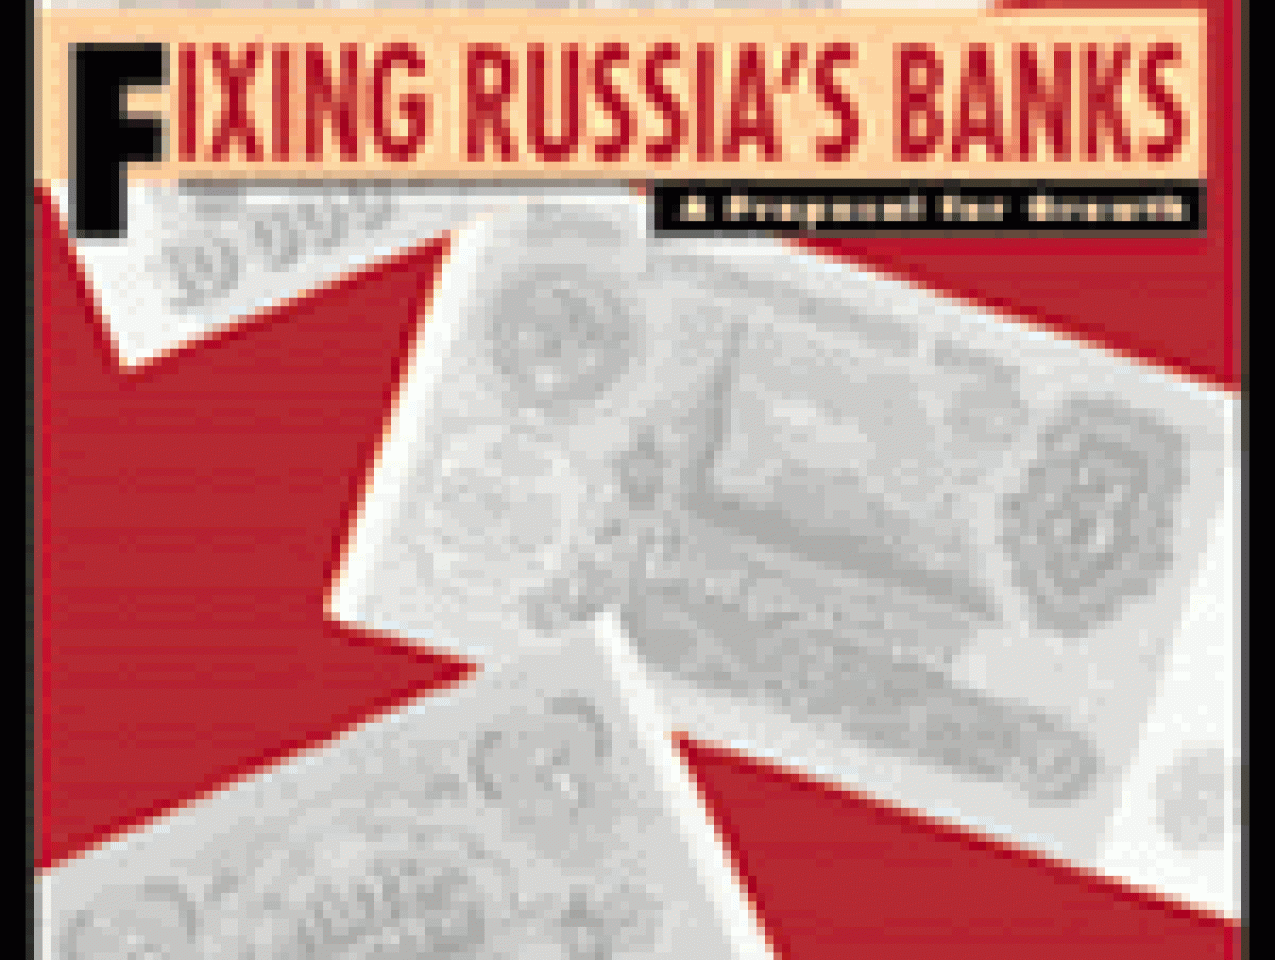 Fixing Russia's Banks:A Proposal for Growth